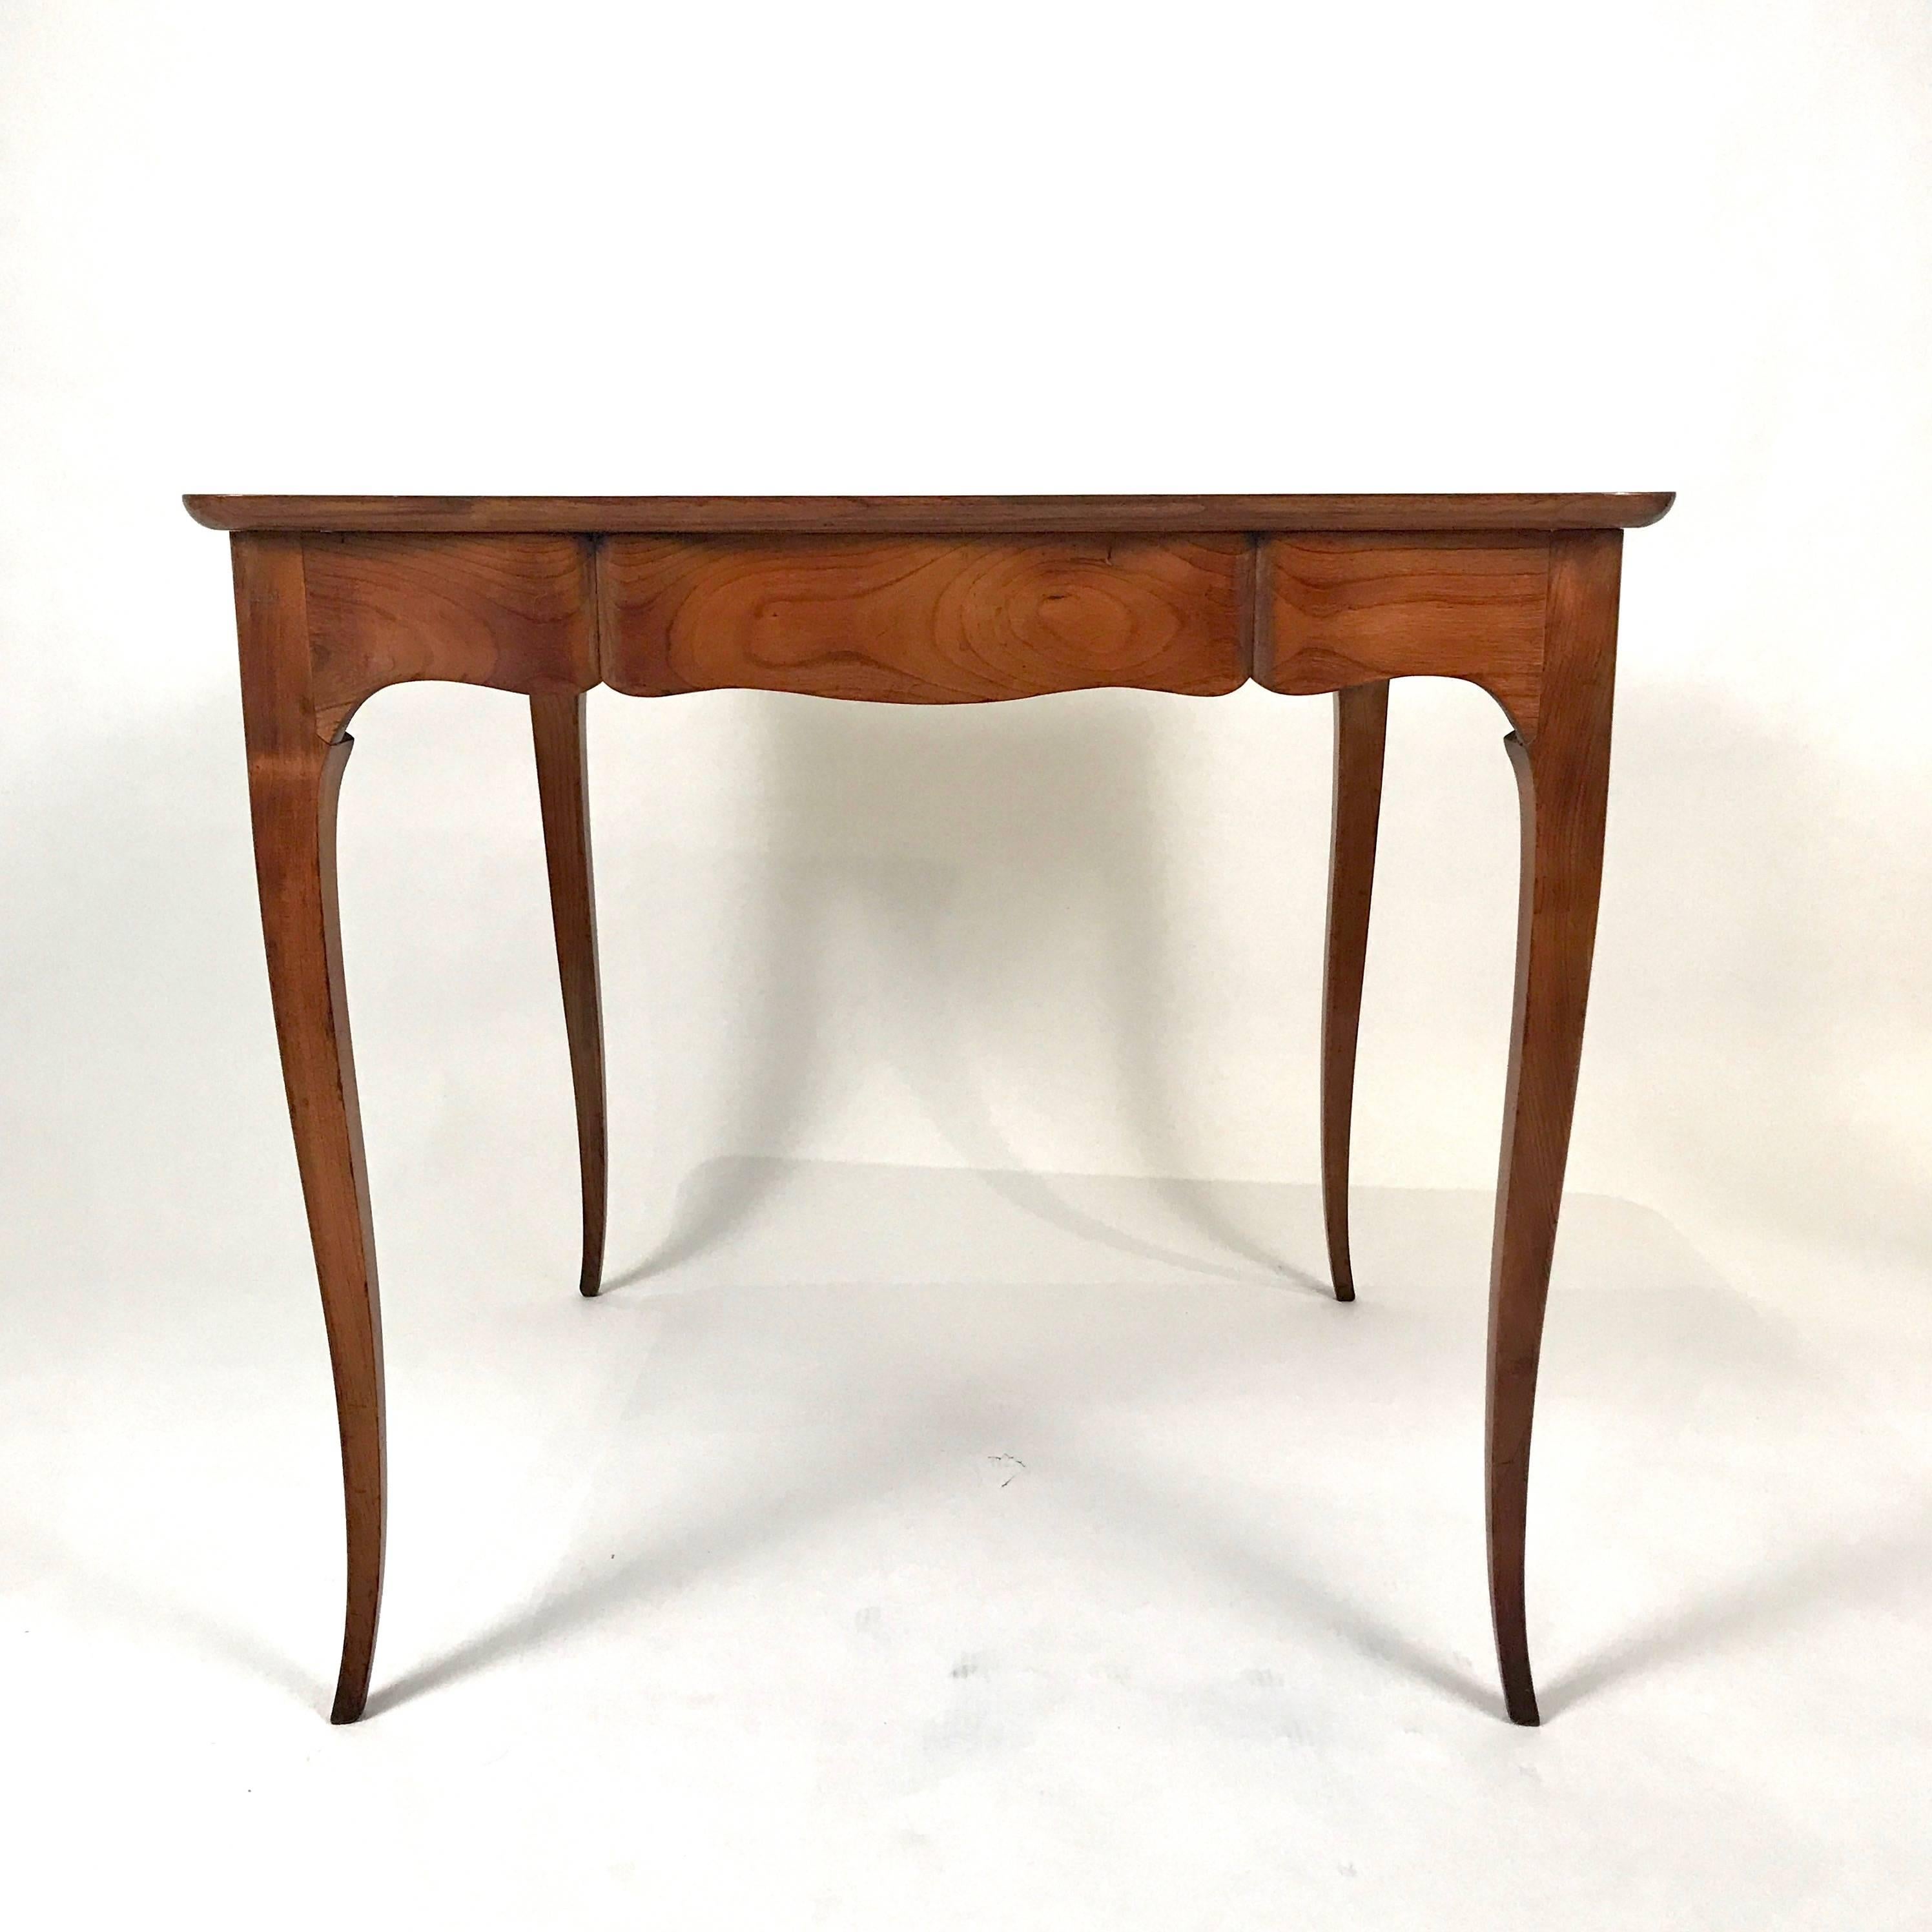 Important two-sided writing desk or game table dating from sometime between 1938-1953. This stunning piece is from Carlhian Paris, France and is constructed with two or more different types of fruitwood. Visibly handcrafted by a master. Hand-carved